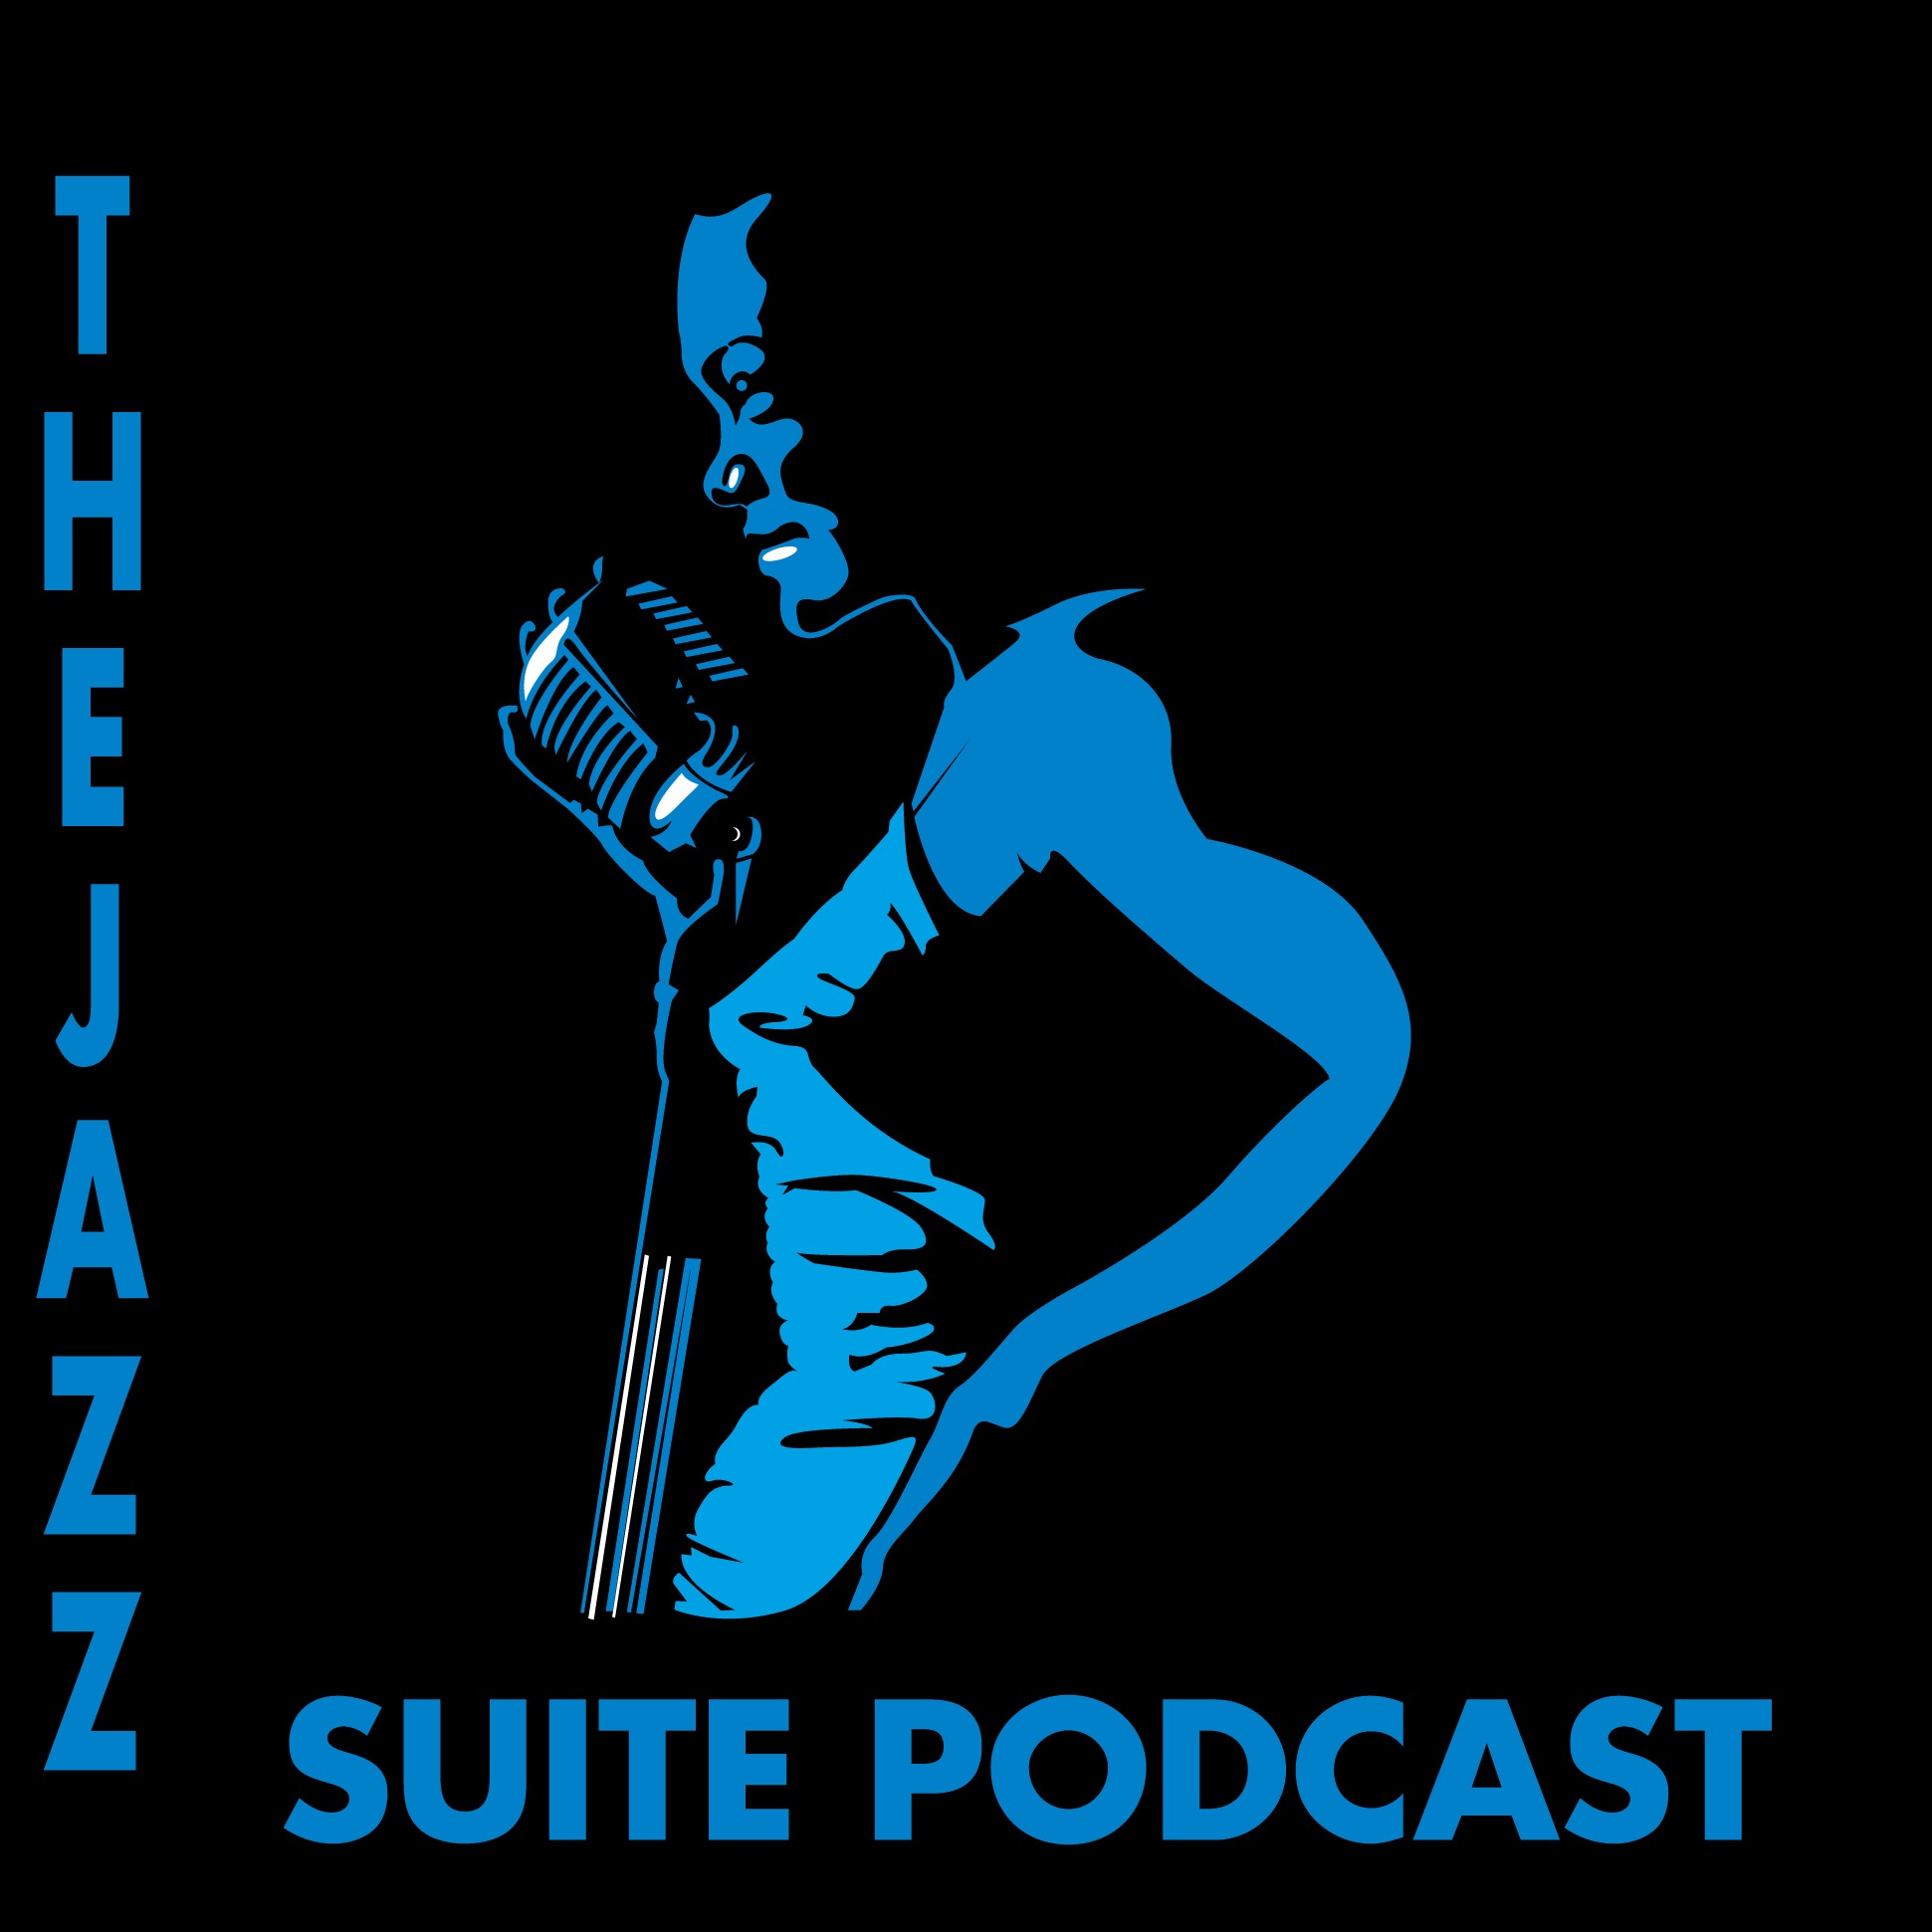 The Jazz Suite Podcast Show #459